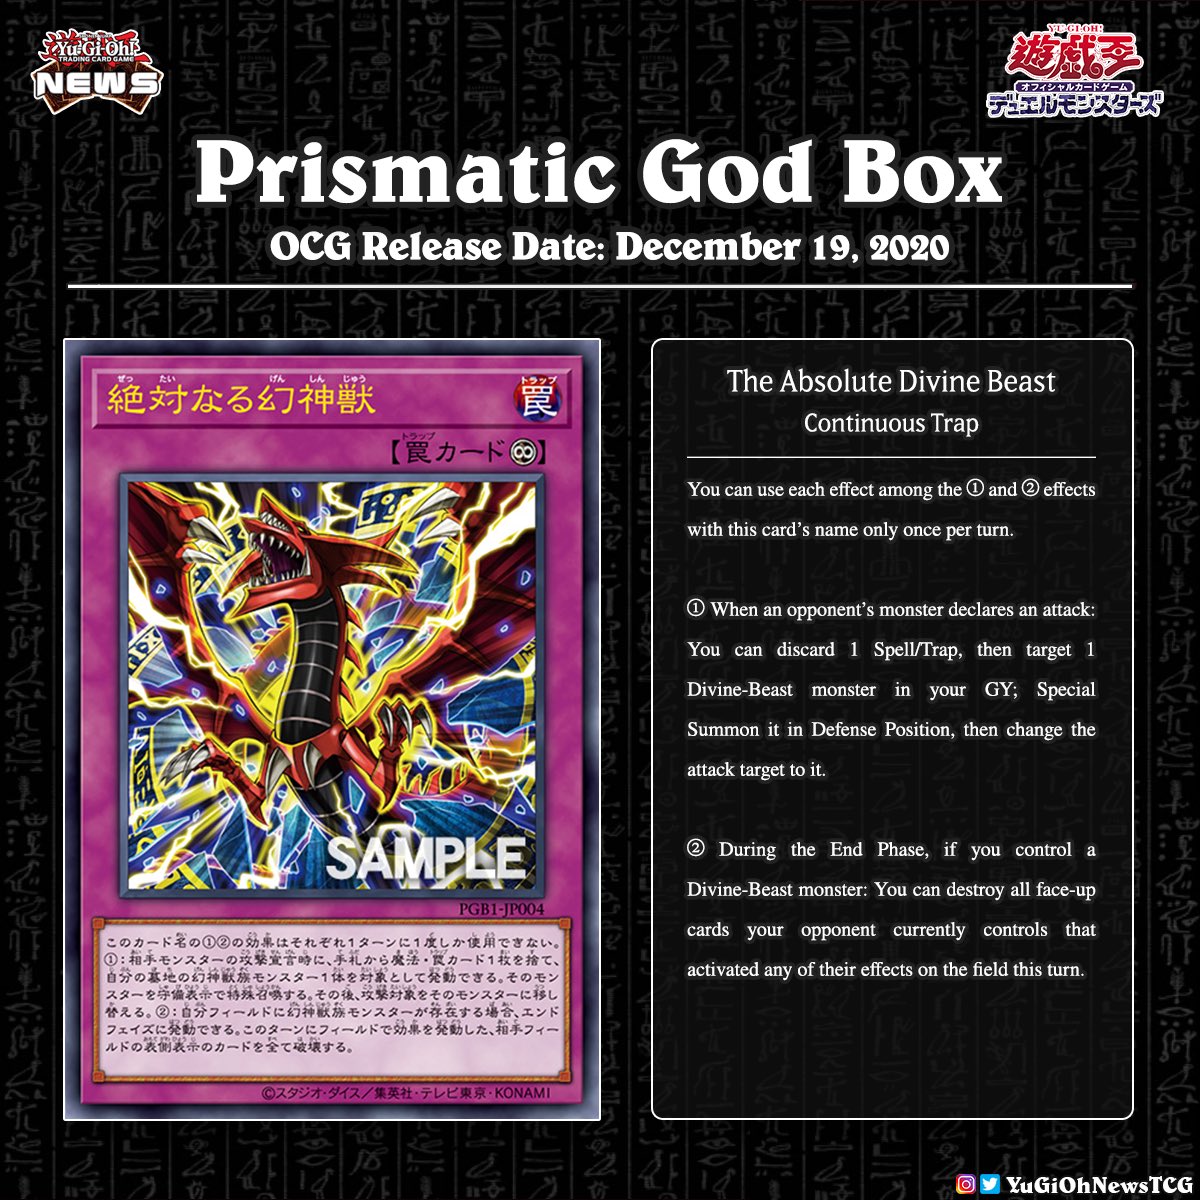 ❰𝗣𝗿𝗶𝘀𝗺𝗮𝘁𝗶𝗰 𝗚𝗼𝗱 𝗕𝗼𝘅❱The upcoming “Prismatic God Box” will include a new “Divine-...